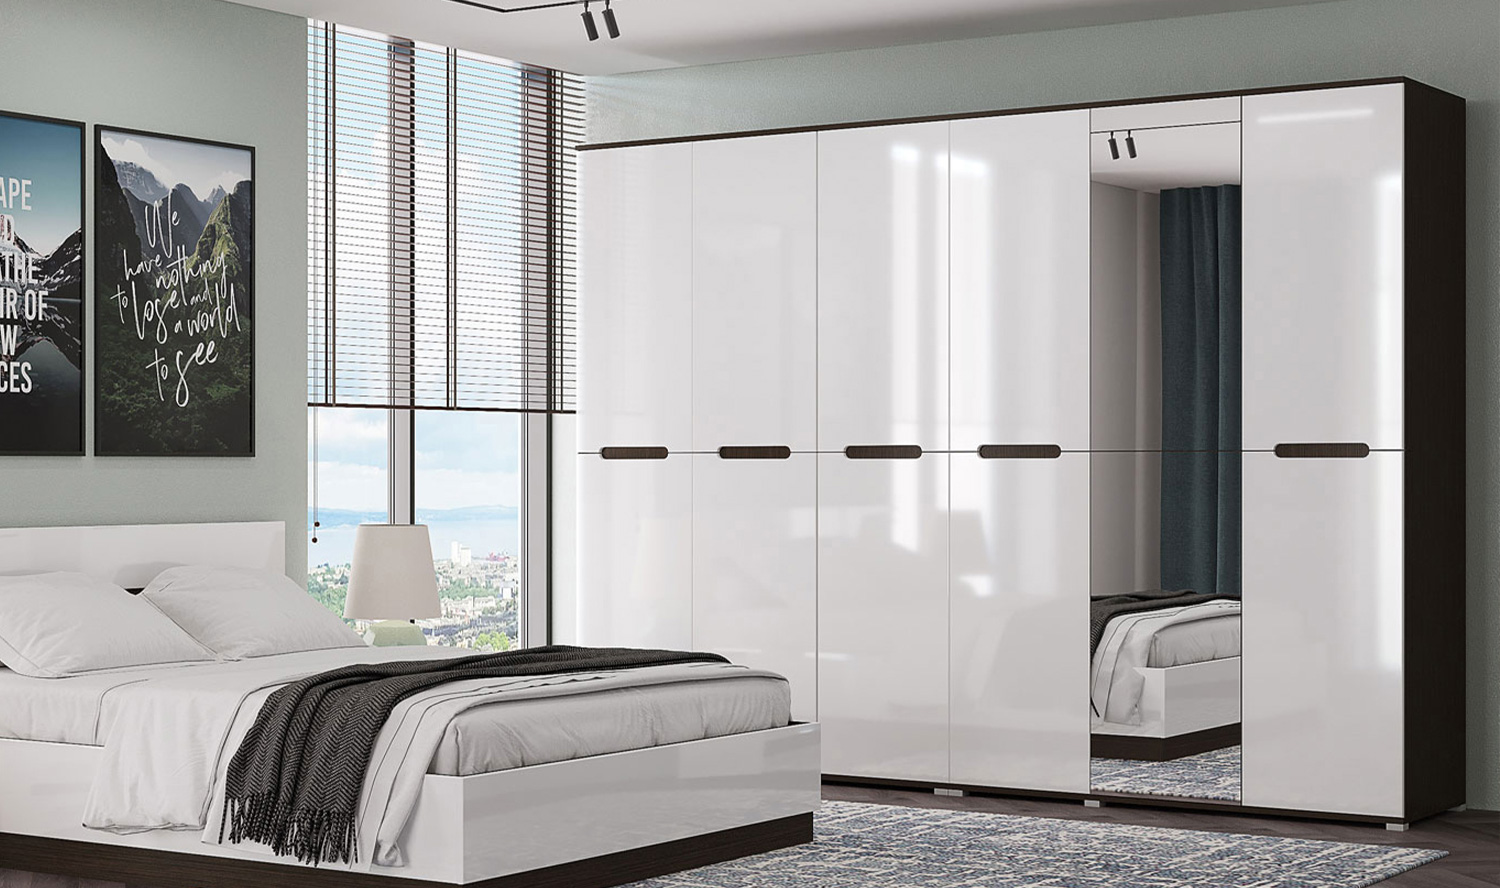 Artuz offers Lacquered Glass Sliding Wardrobe Shutters in Bangalore, F2C wardrobes with a shiny and rich finish to your wardrobe with the sliding mechanism.